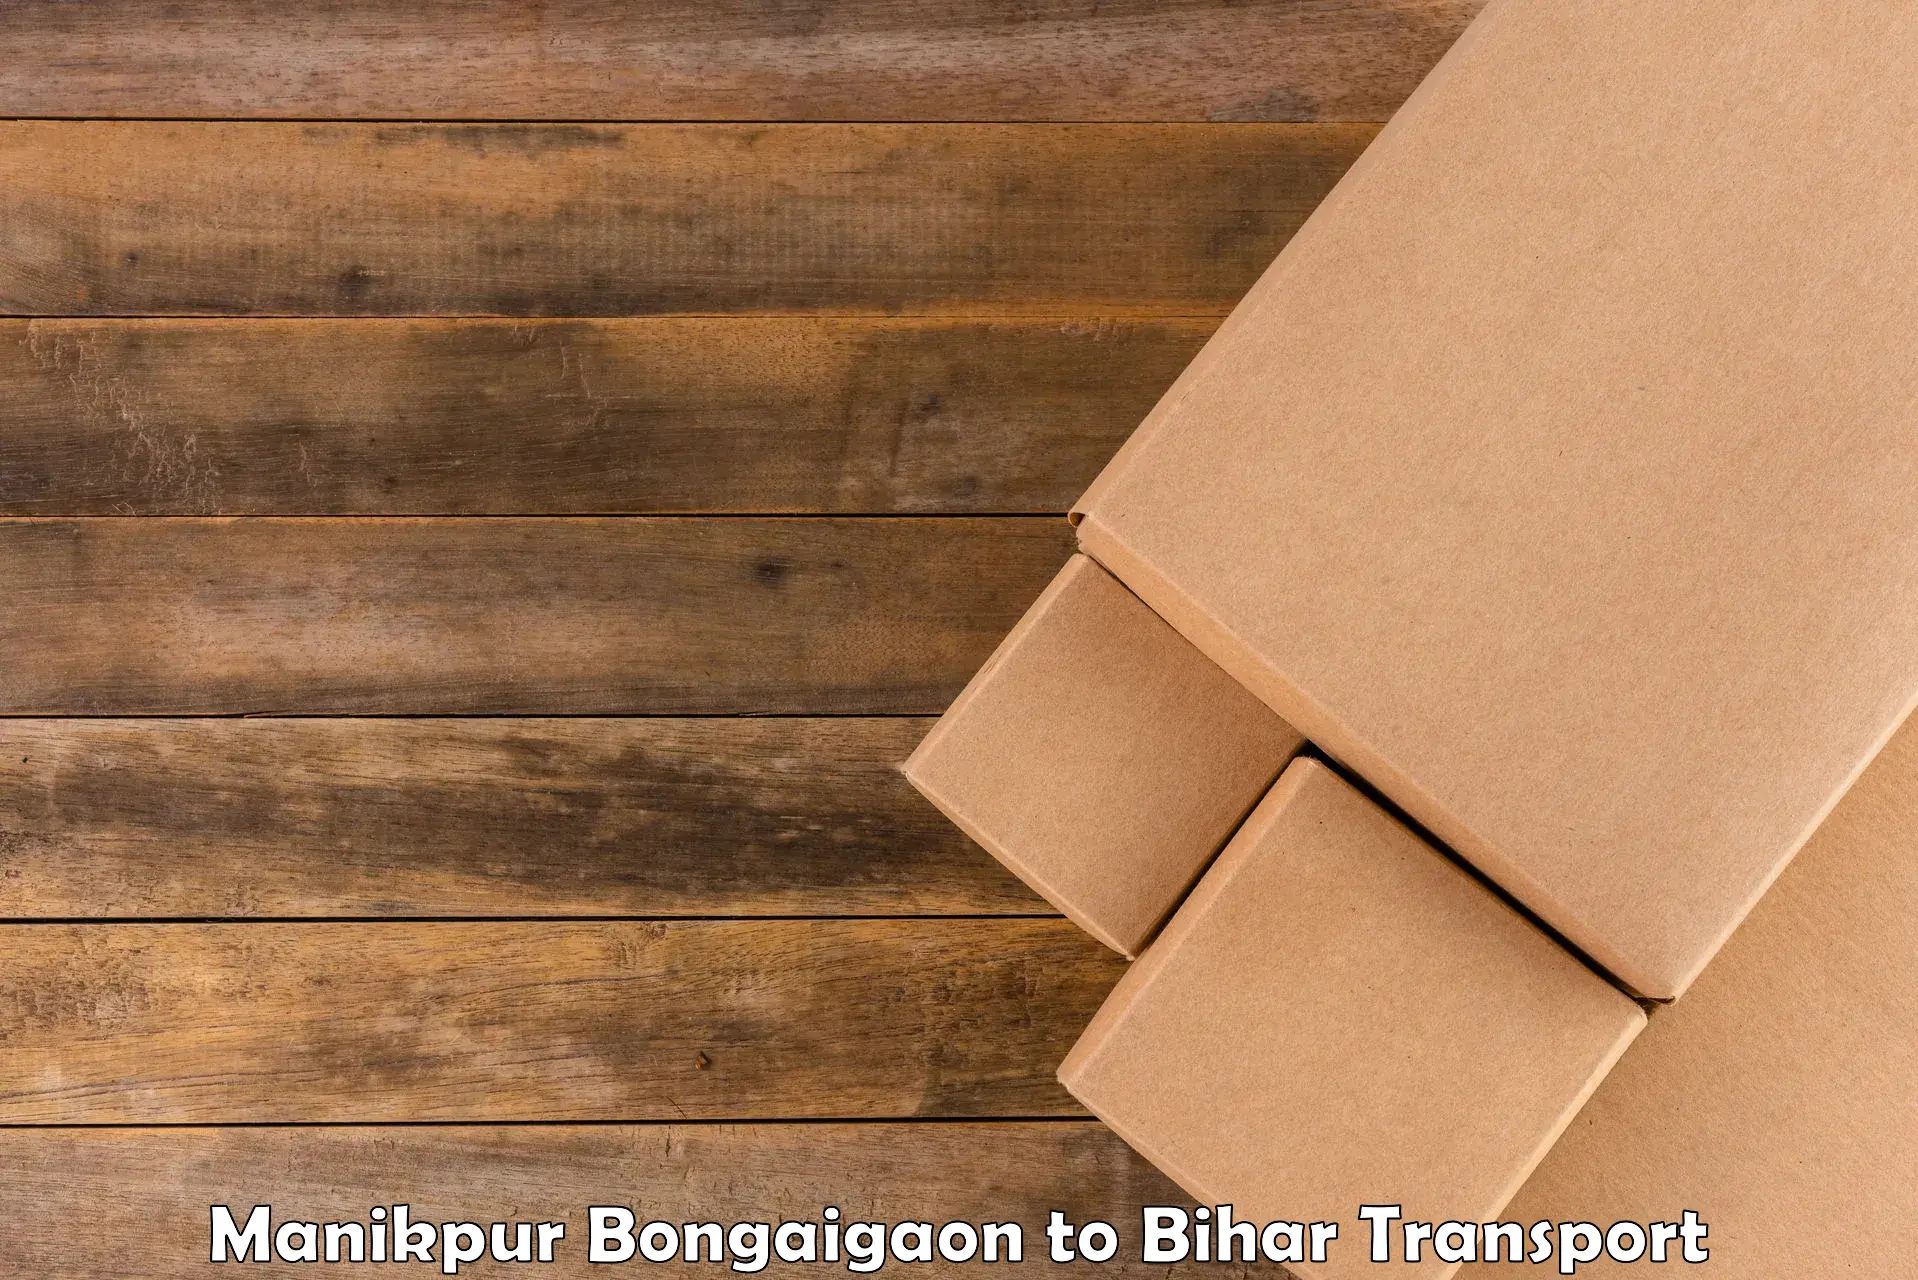 Express transport services in Manikpur Bongaigaon to Chainpur